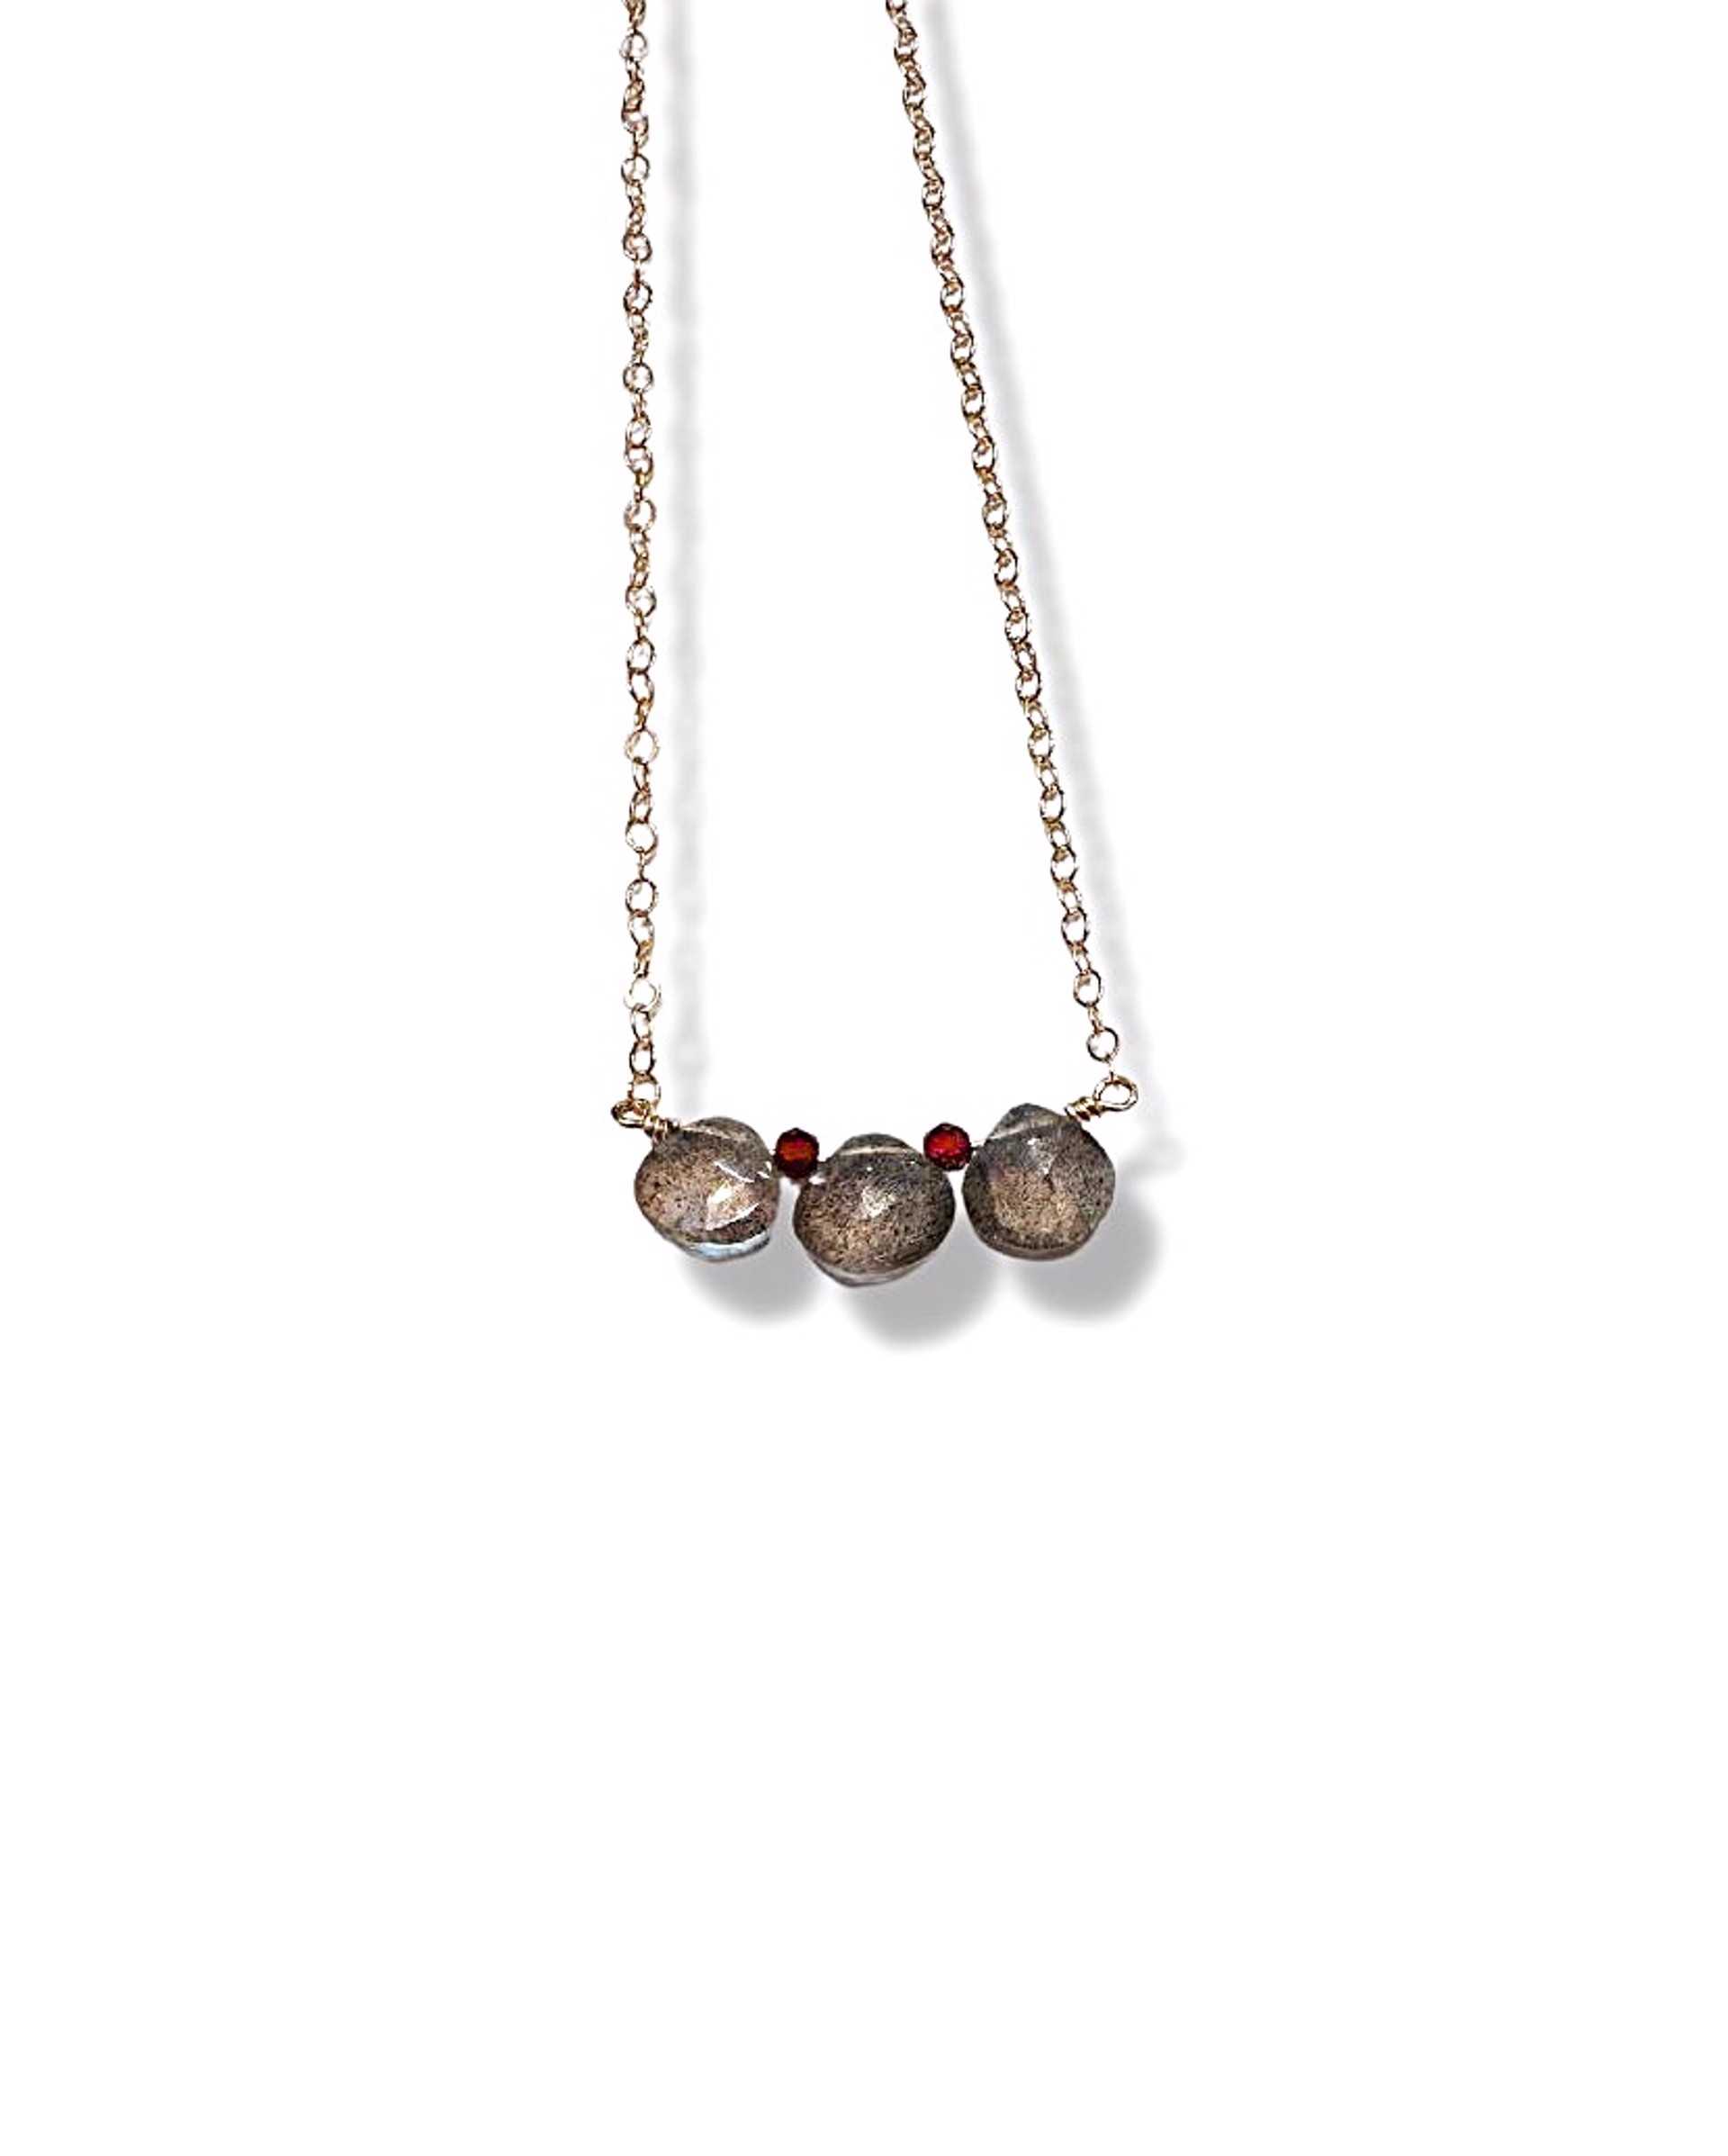 Necklace - Labradorite and Garnet with 14K Gold Filling by Julia Balestracci